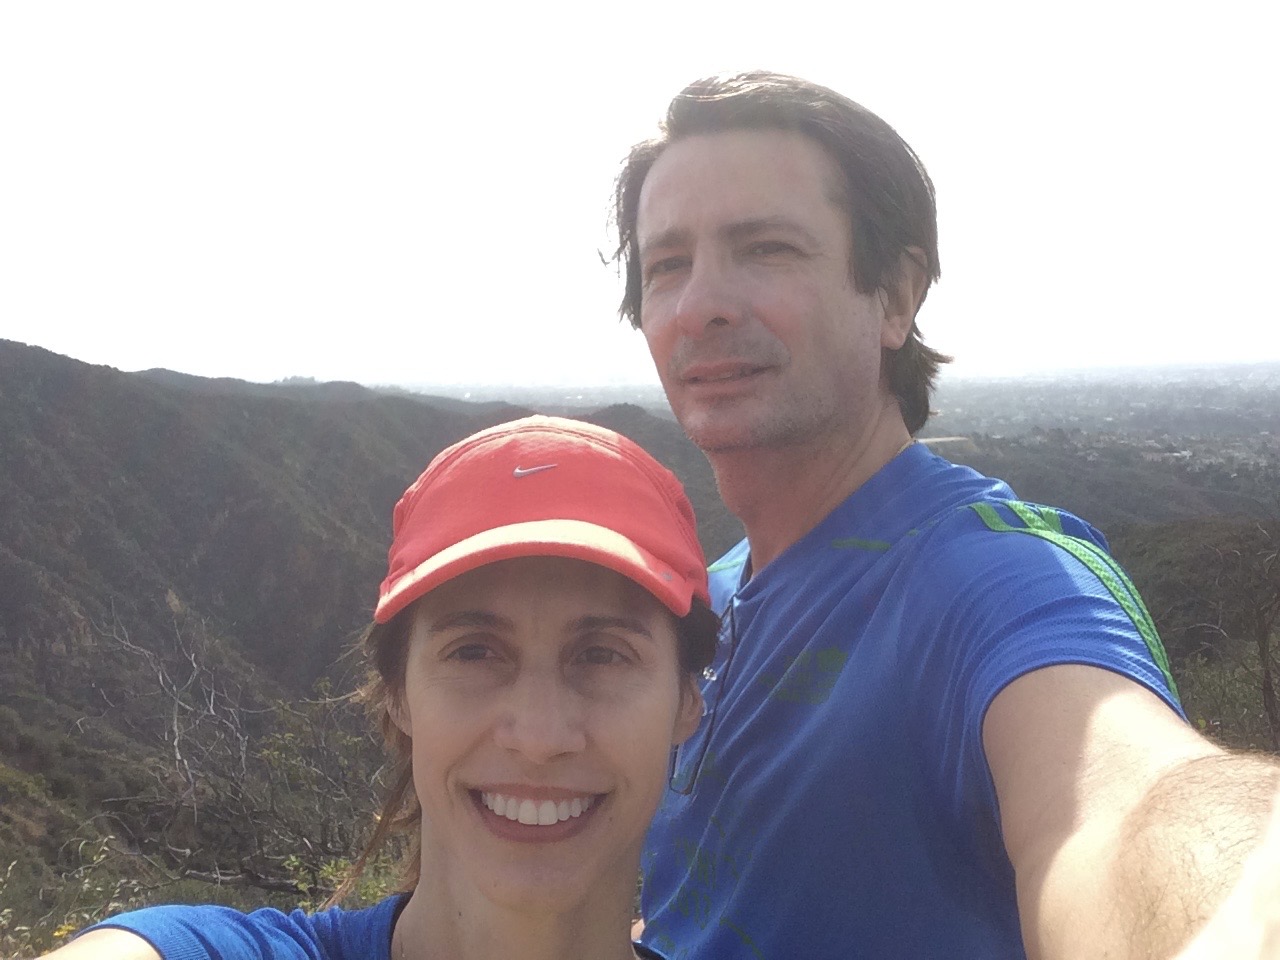 Man and woman taking selfie on a hike